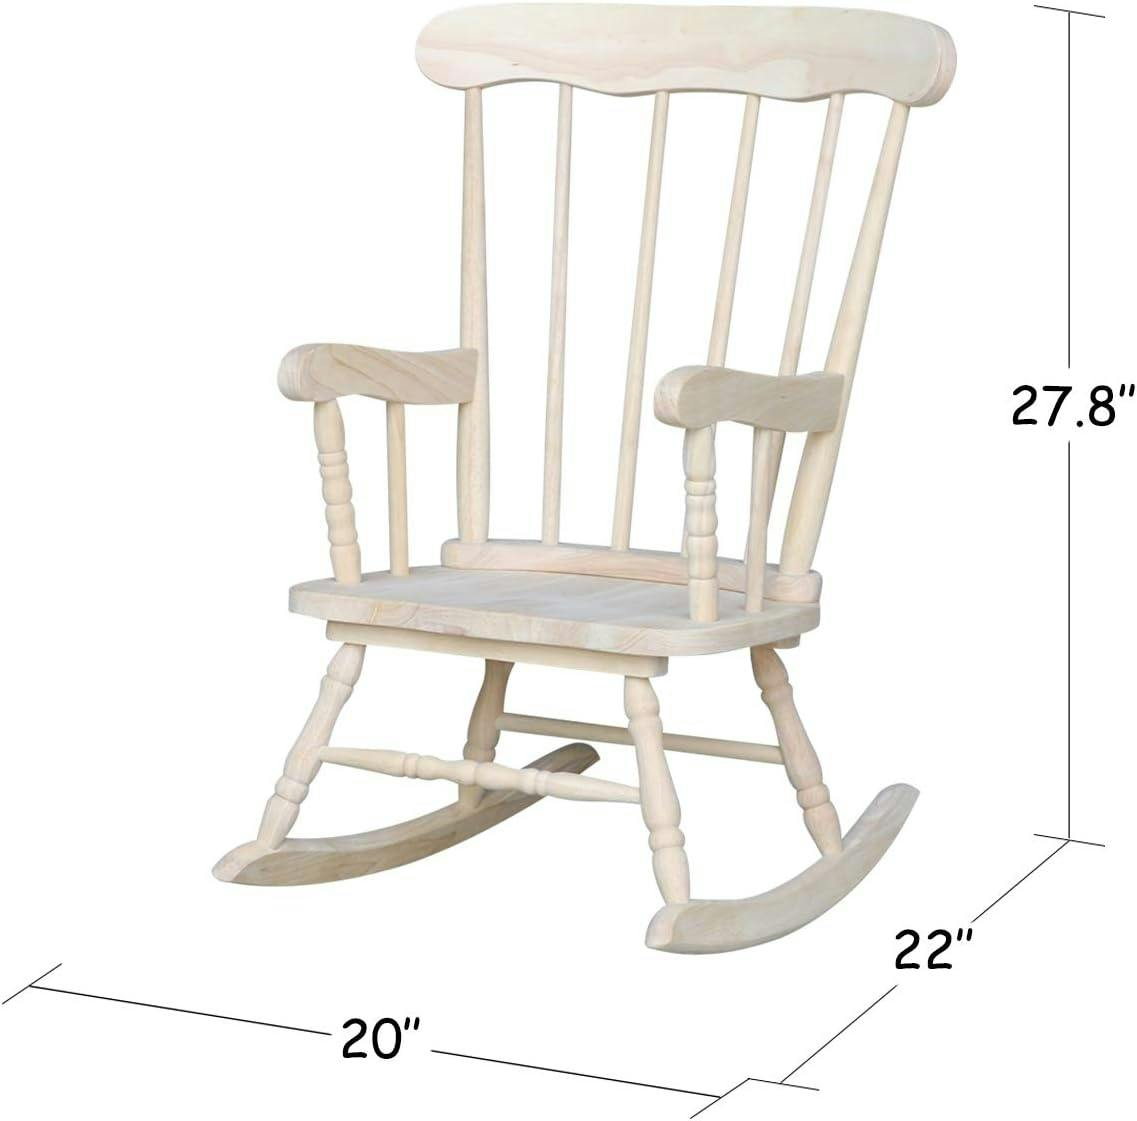 Traditional Unfinished Solid Wood Kids Rocker for Nursery and Playroom